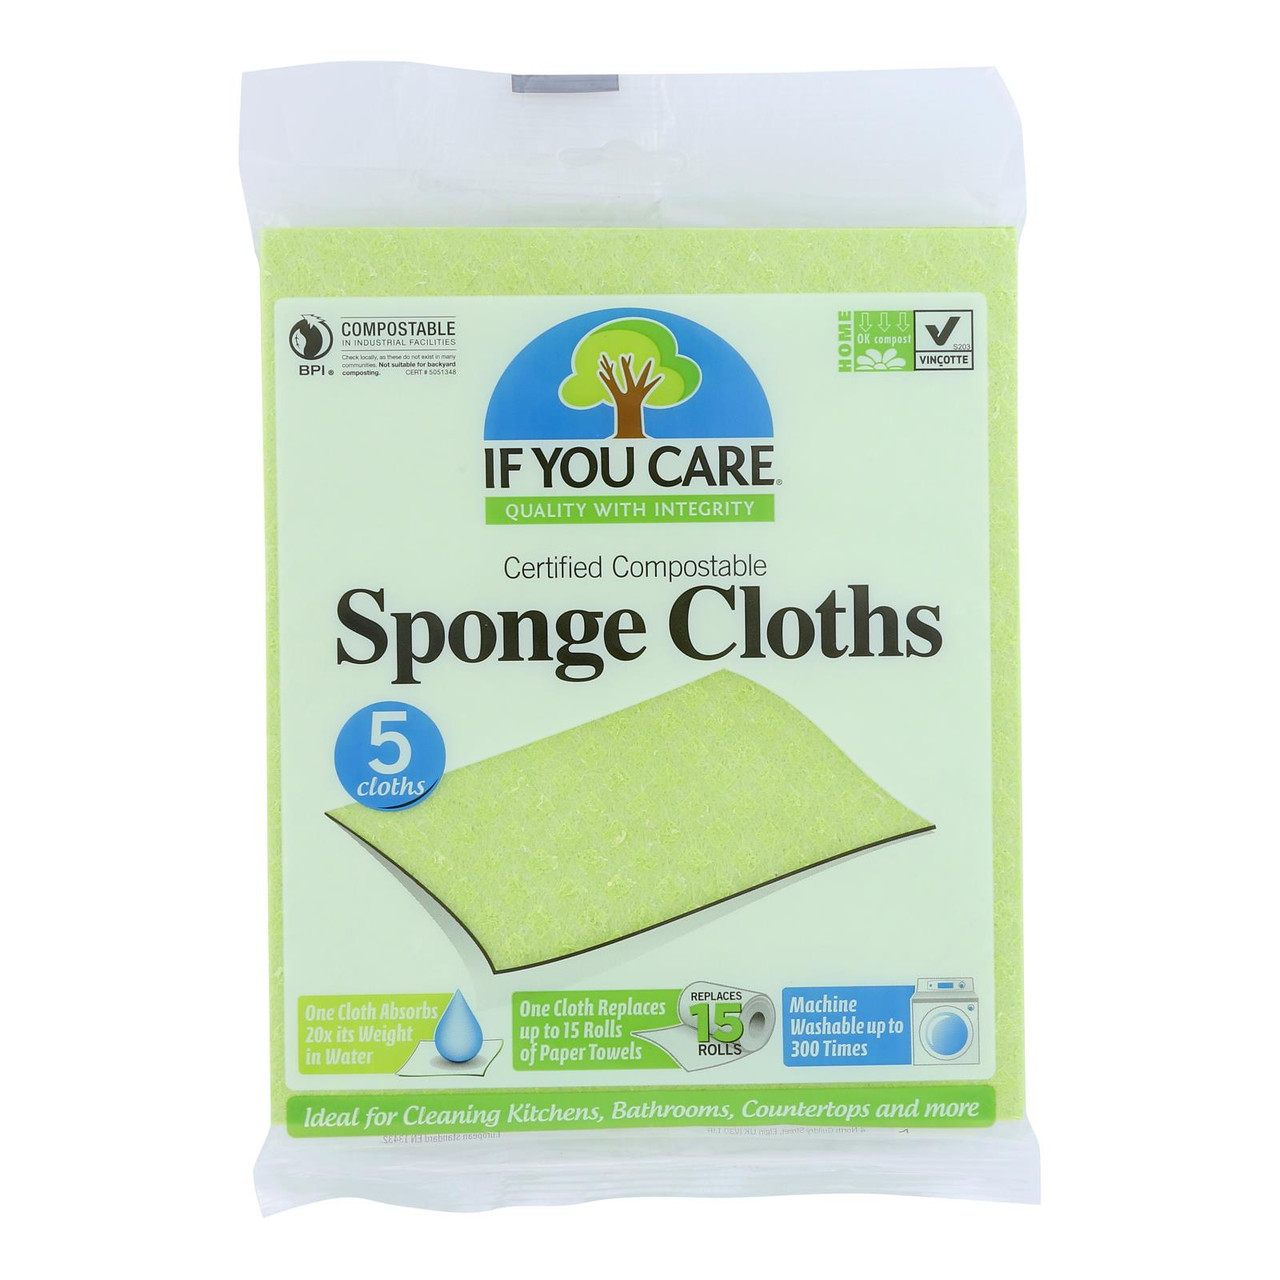  If You Care Sponge Cloths – 5 Count – 100% Natural